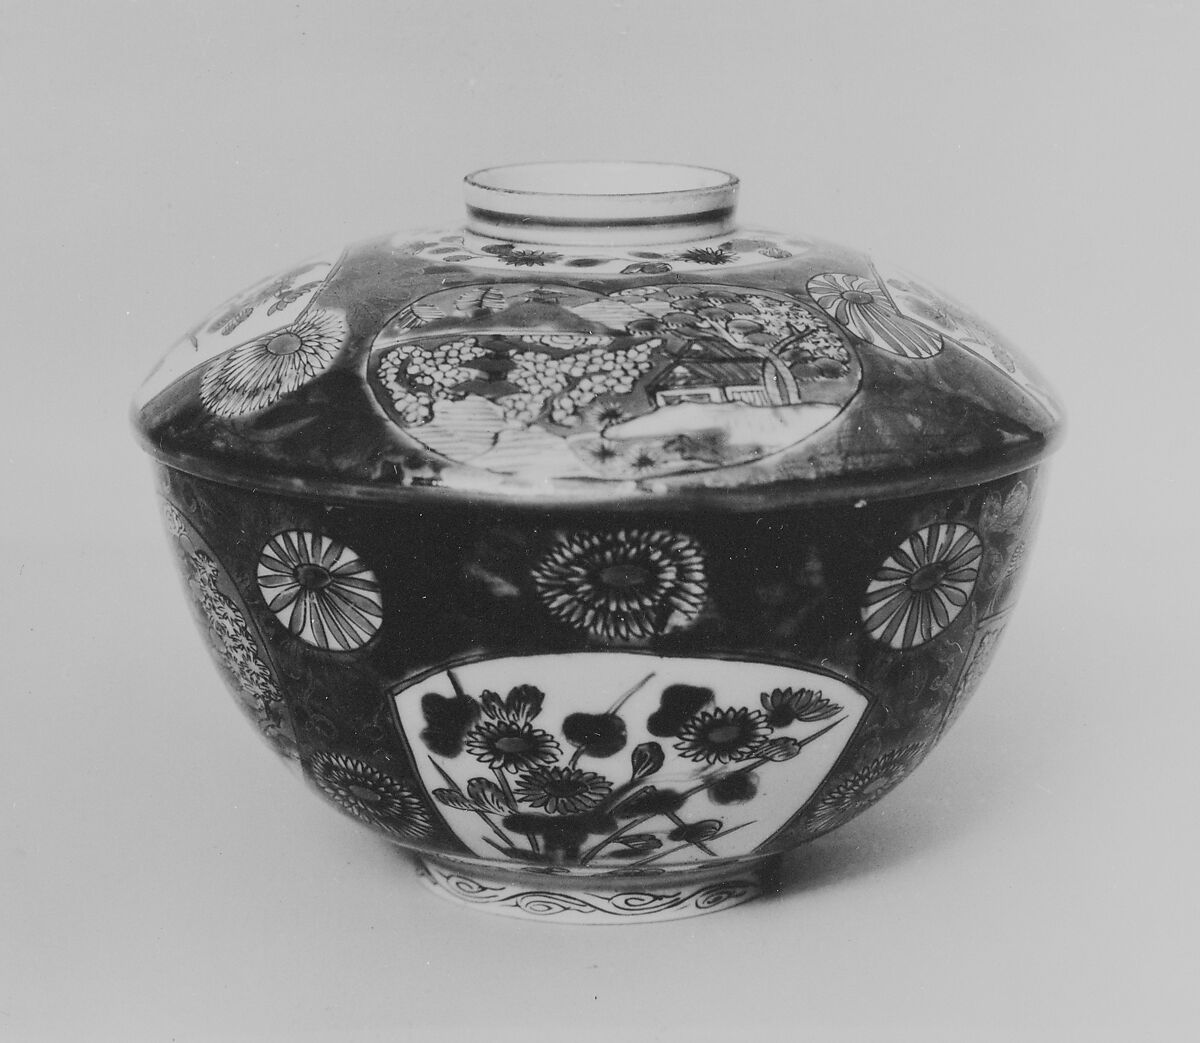 Bowl with Cover, Porcelain decorated with enamels (Arita ware, Imari type), Japan 